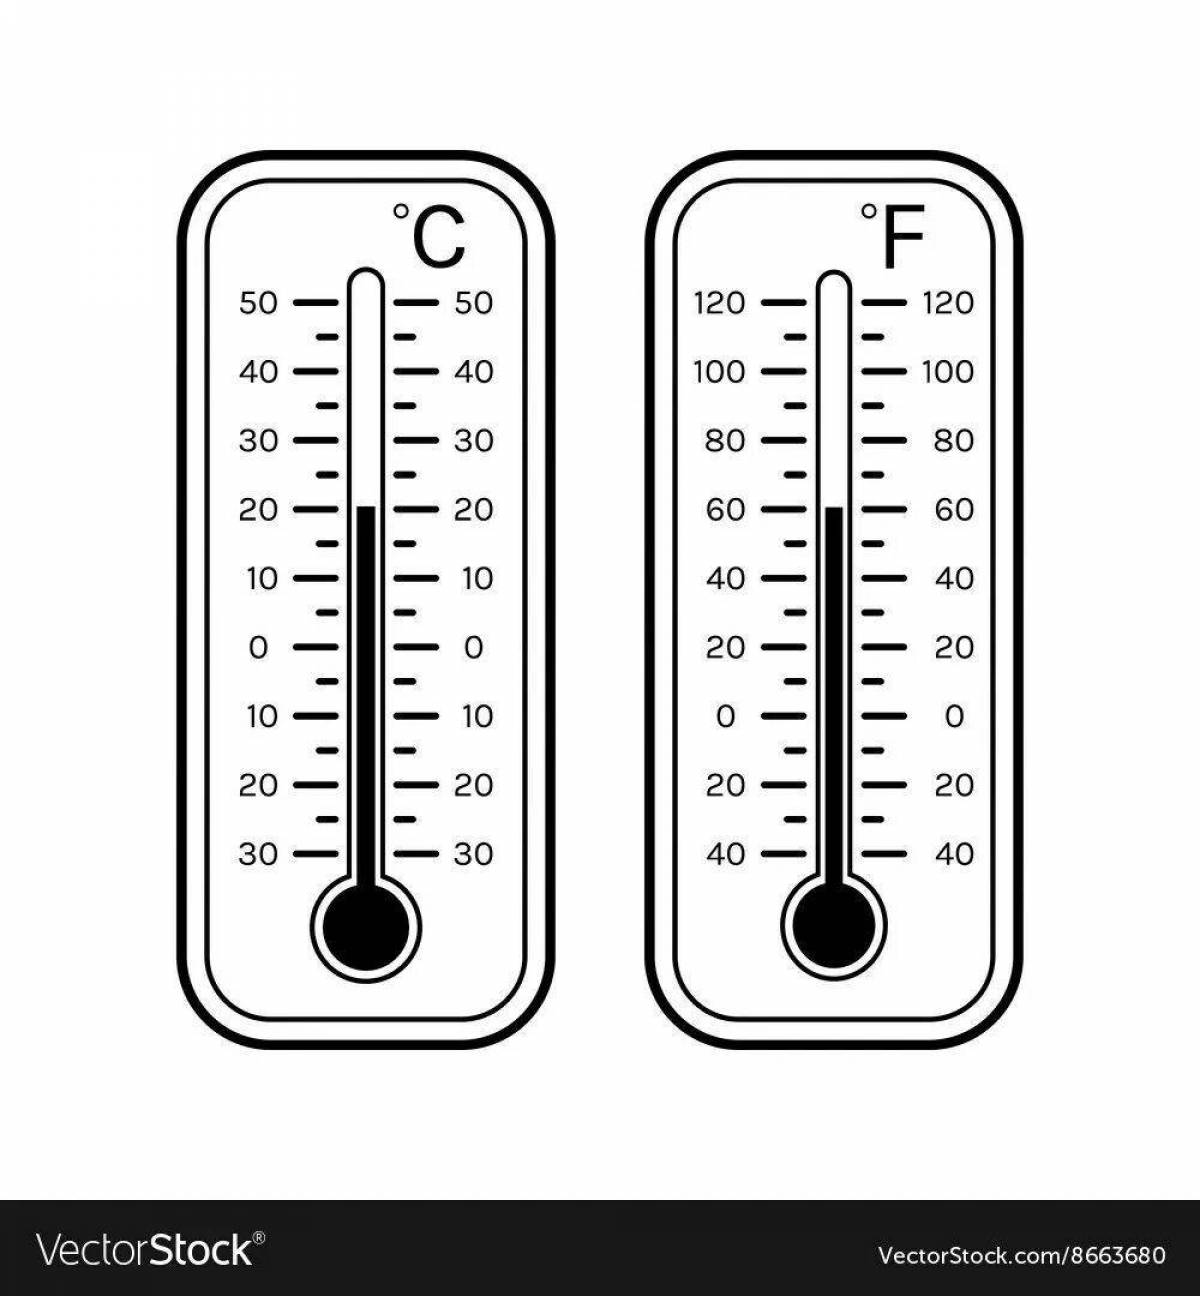 Thermometer #17